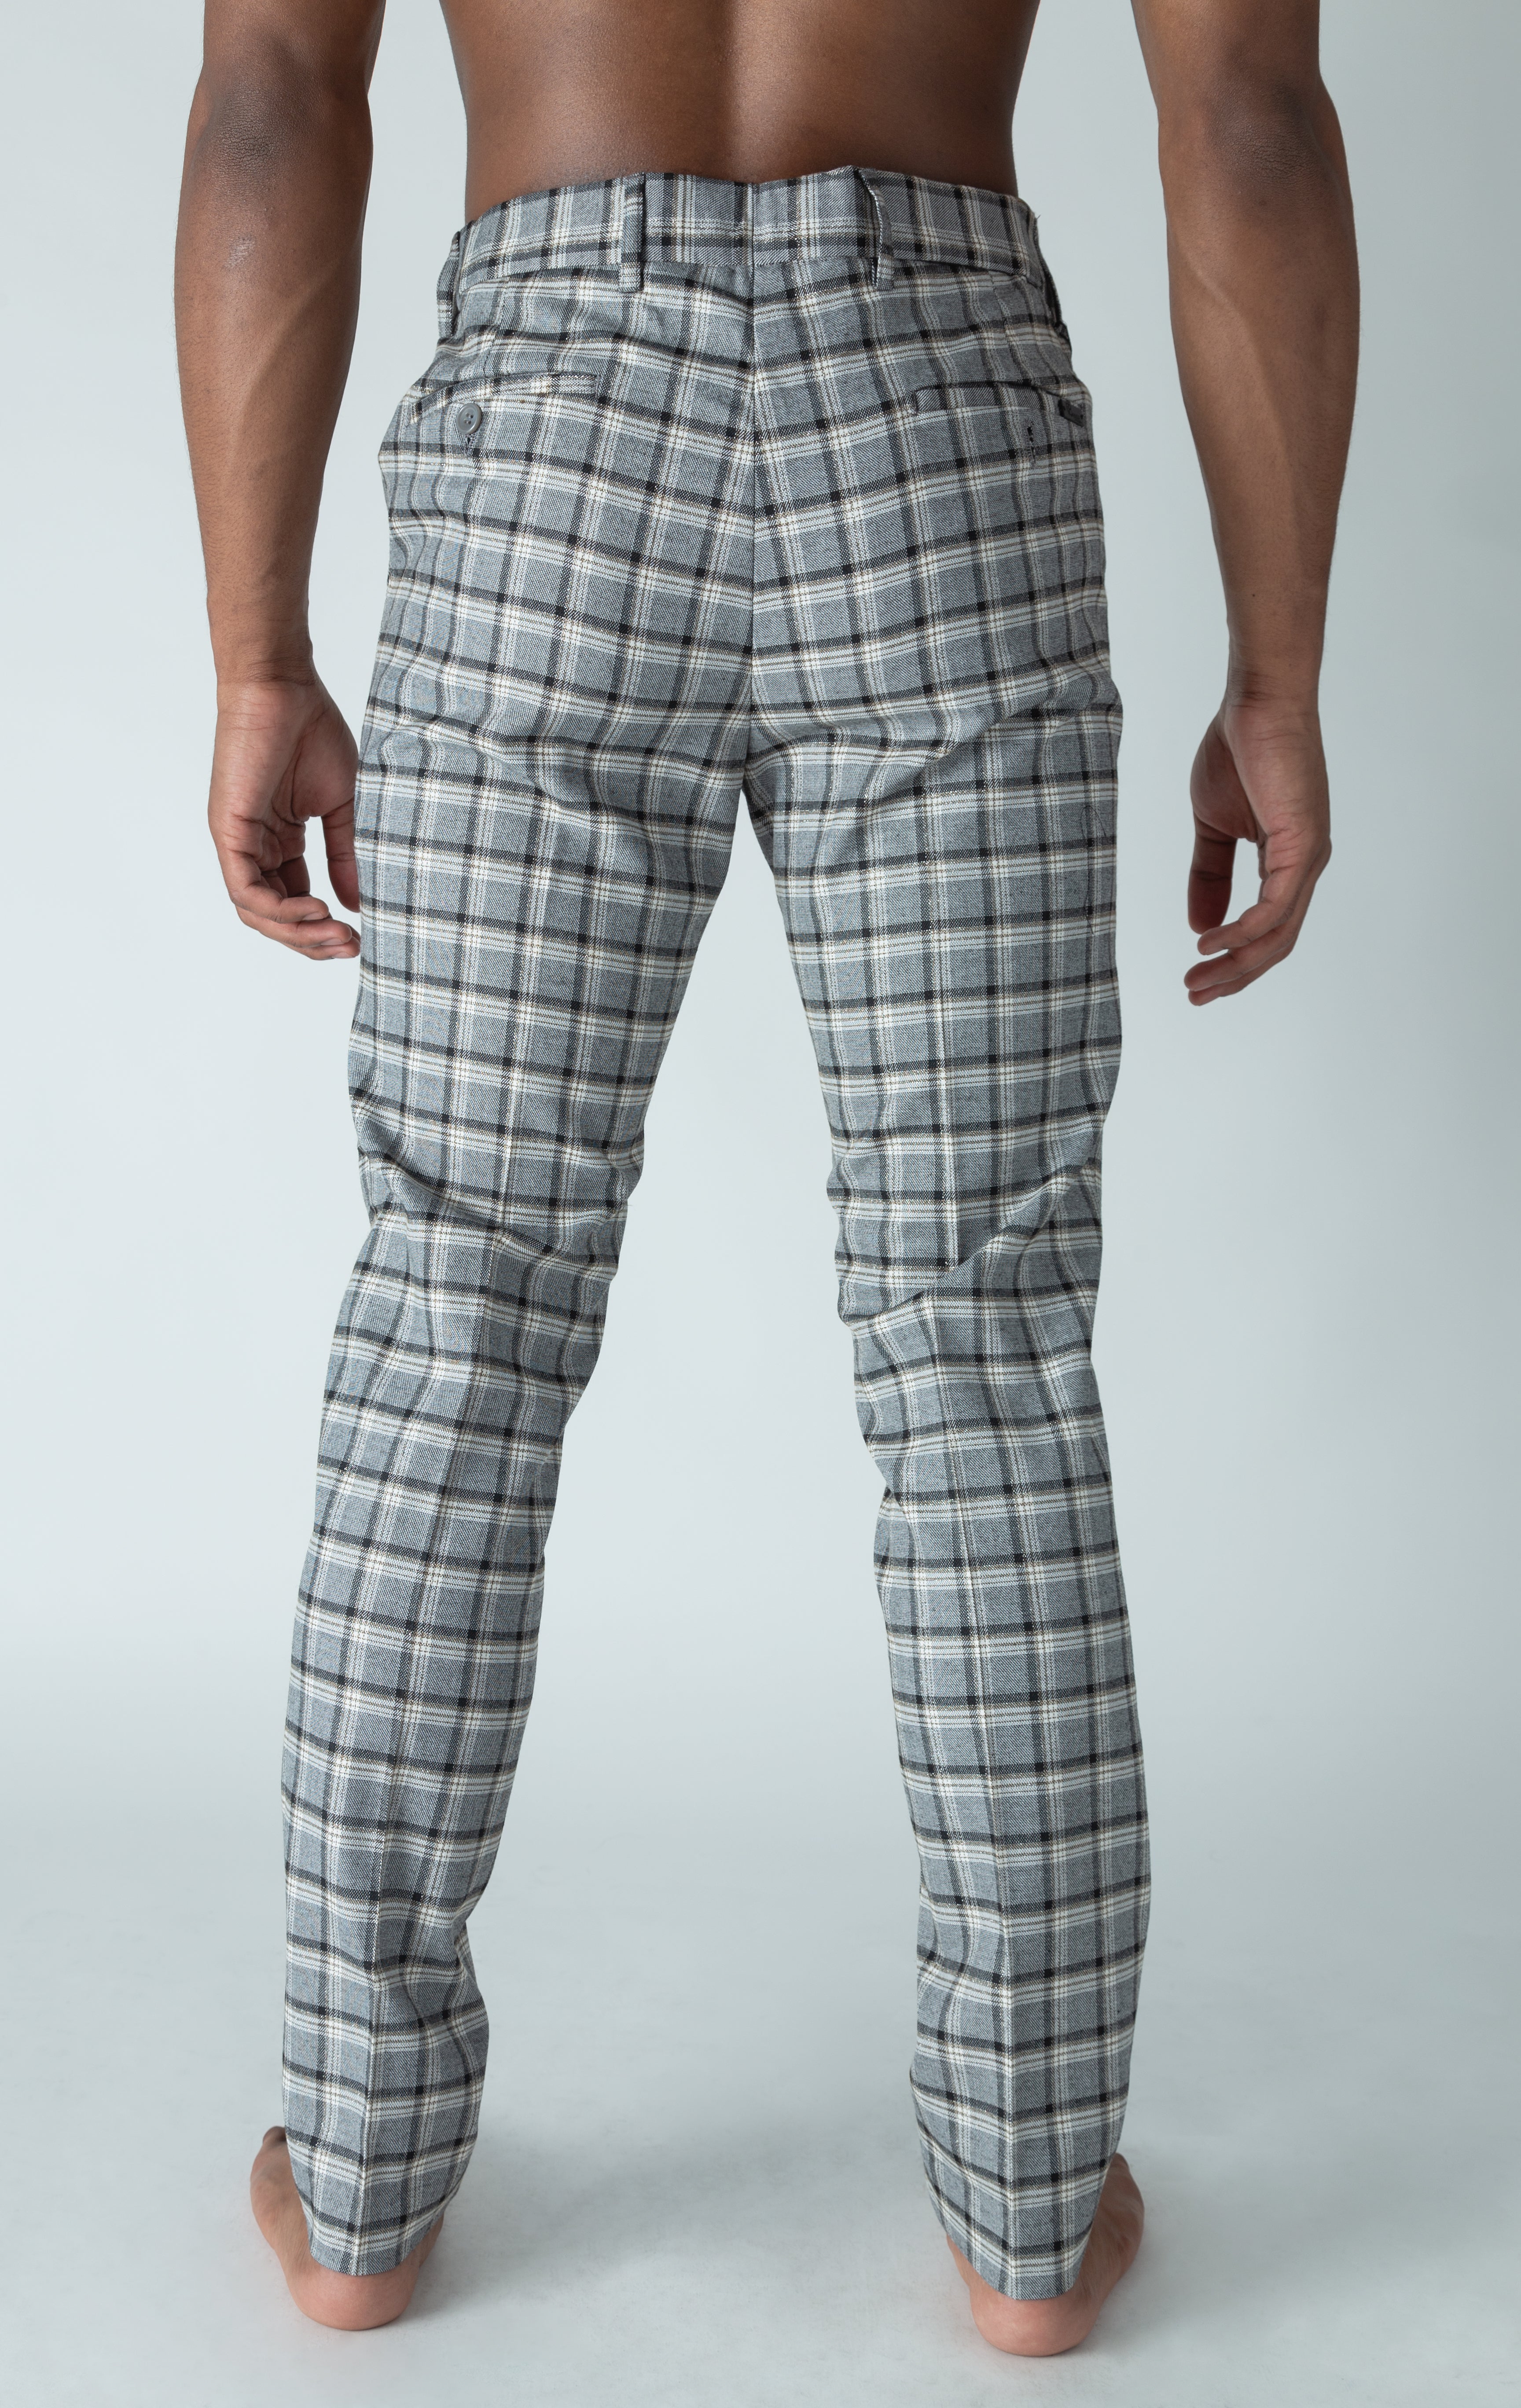 Men's grey chino pants with a checkered plaid design. The pants feature an elastic waistband for comfort and stretch, and are made from a lightweight cotton-spandex blend fabric. Inseam is 32 inches.